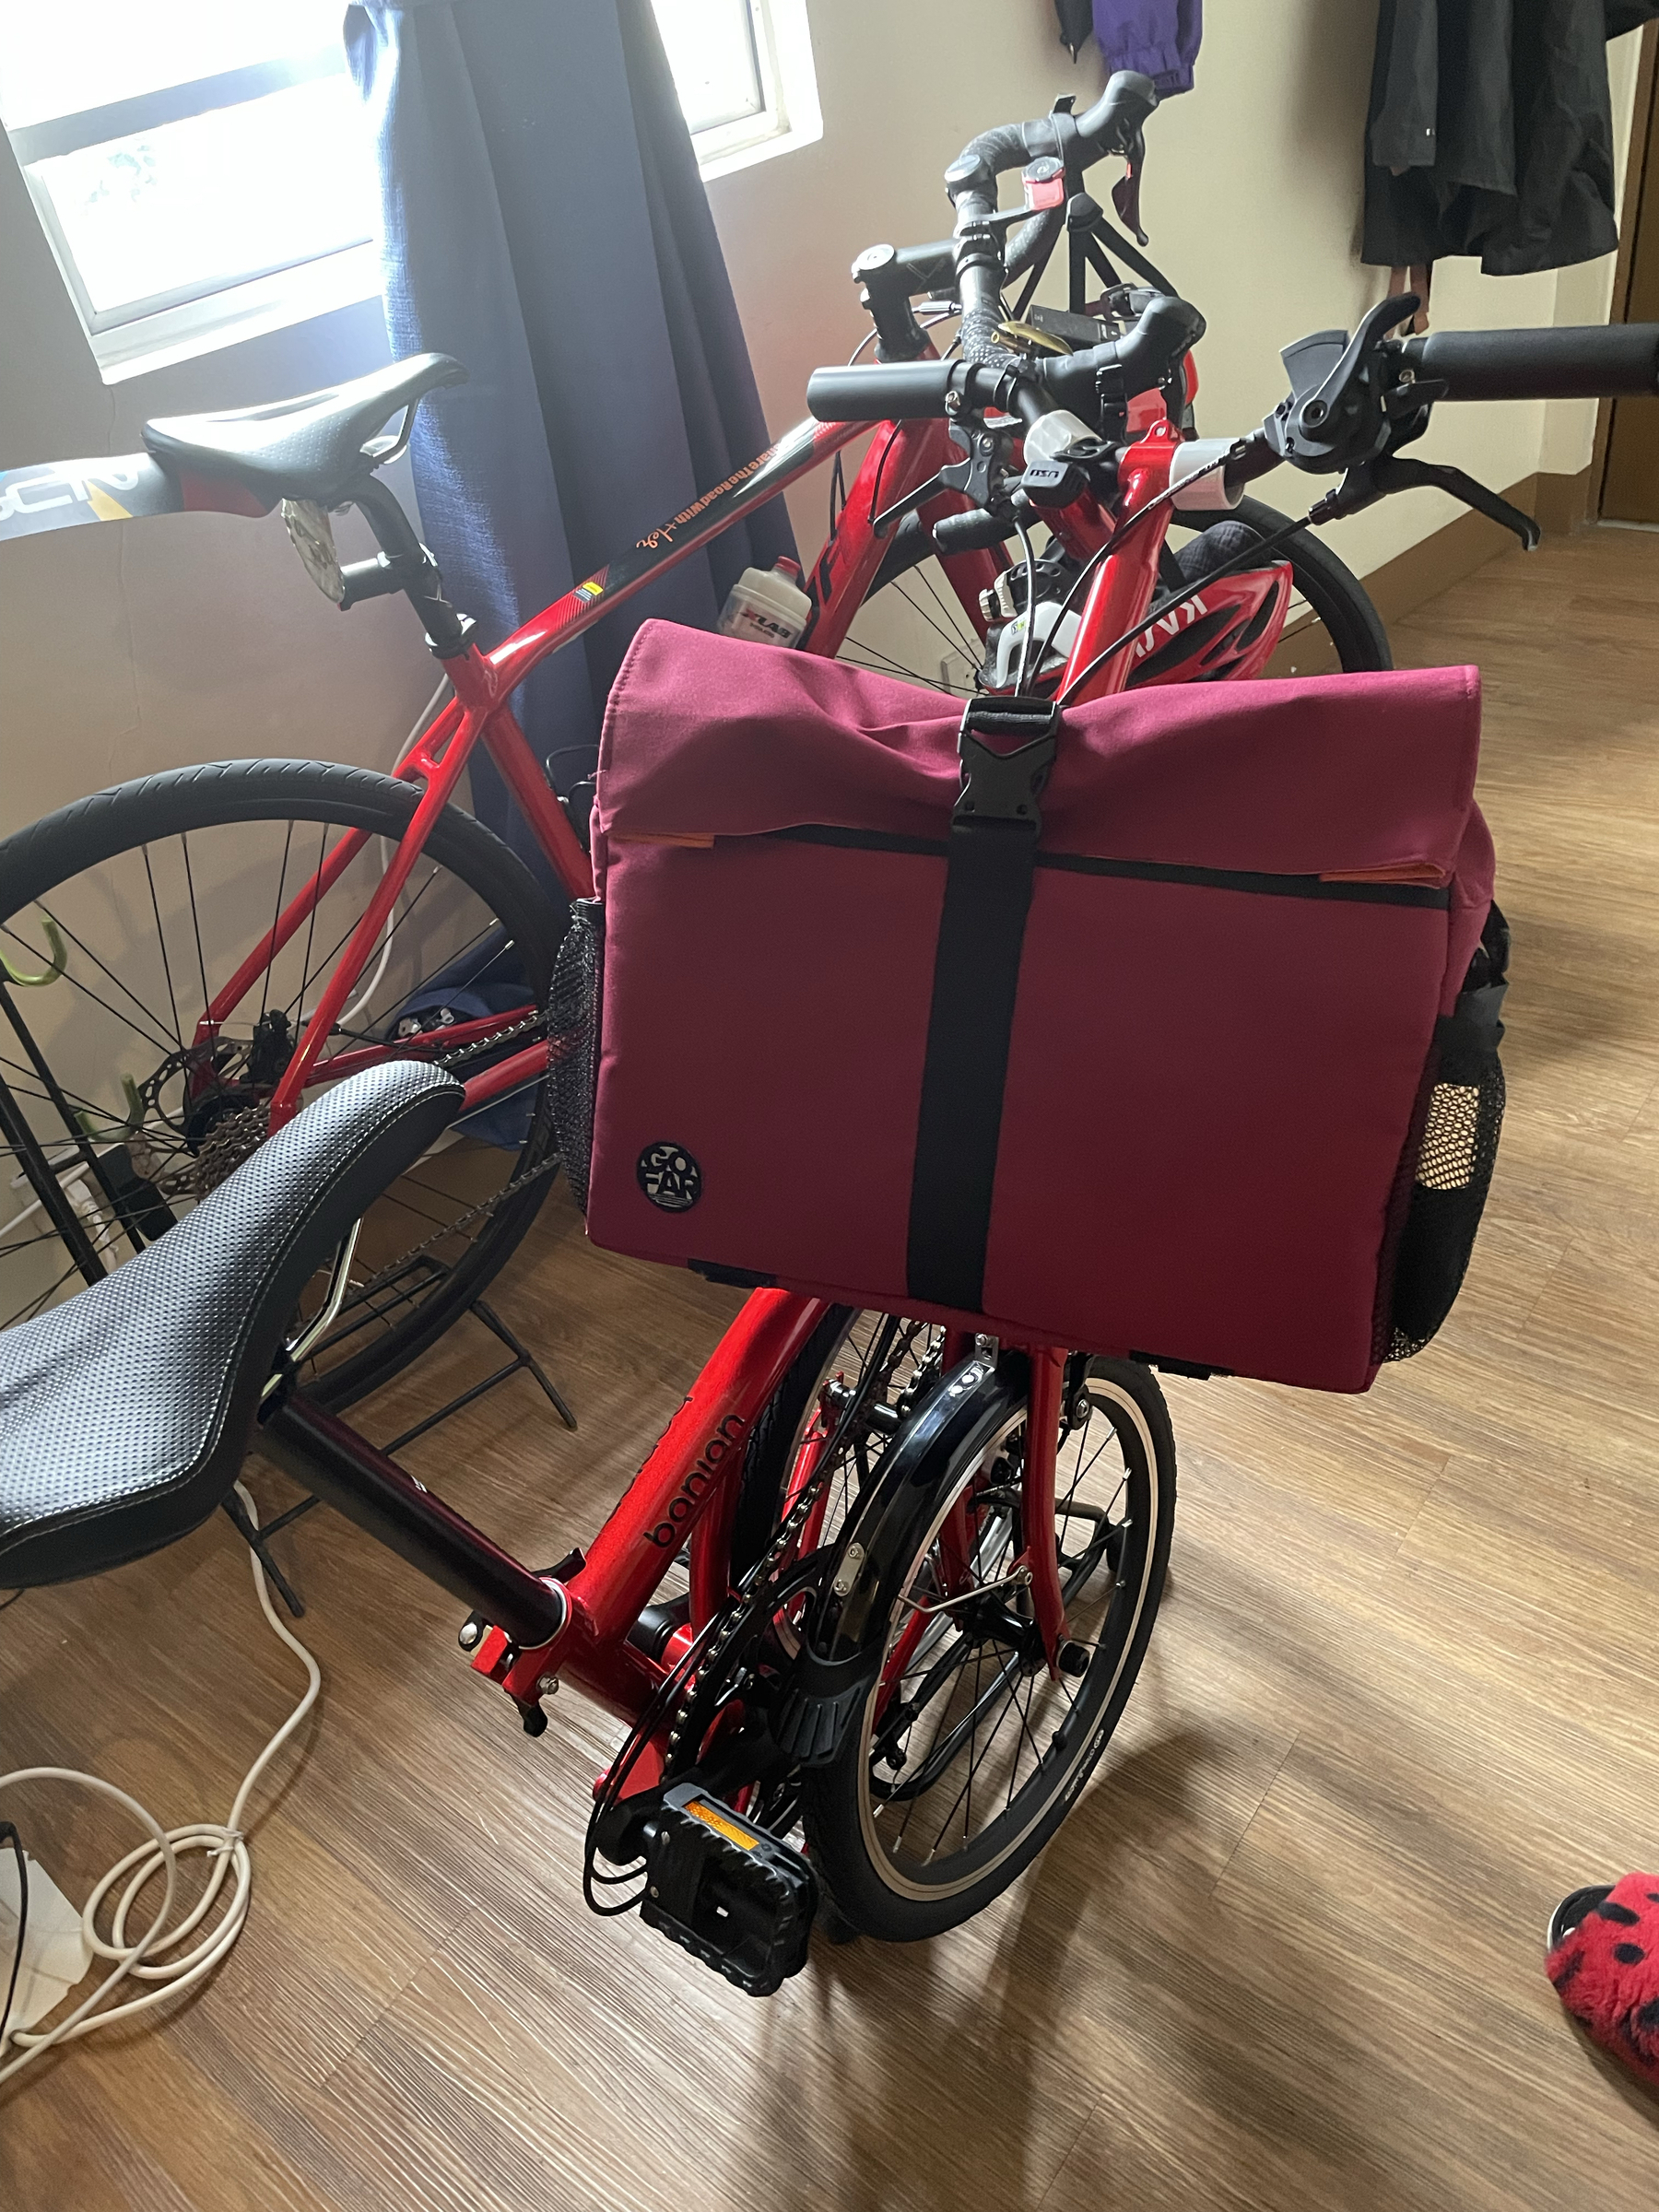 photo of Chi’s trifold bike folded into the trifolded state, with a front bag still neatly attached and doesn’t seem to hinder bringing it around